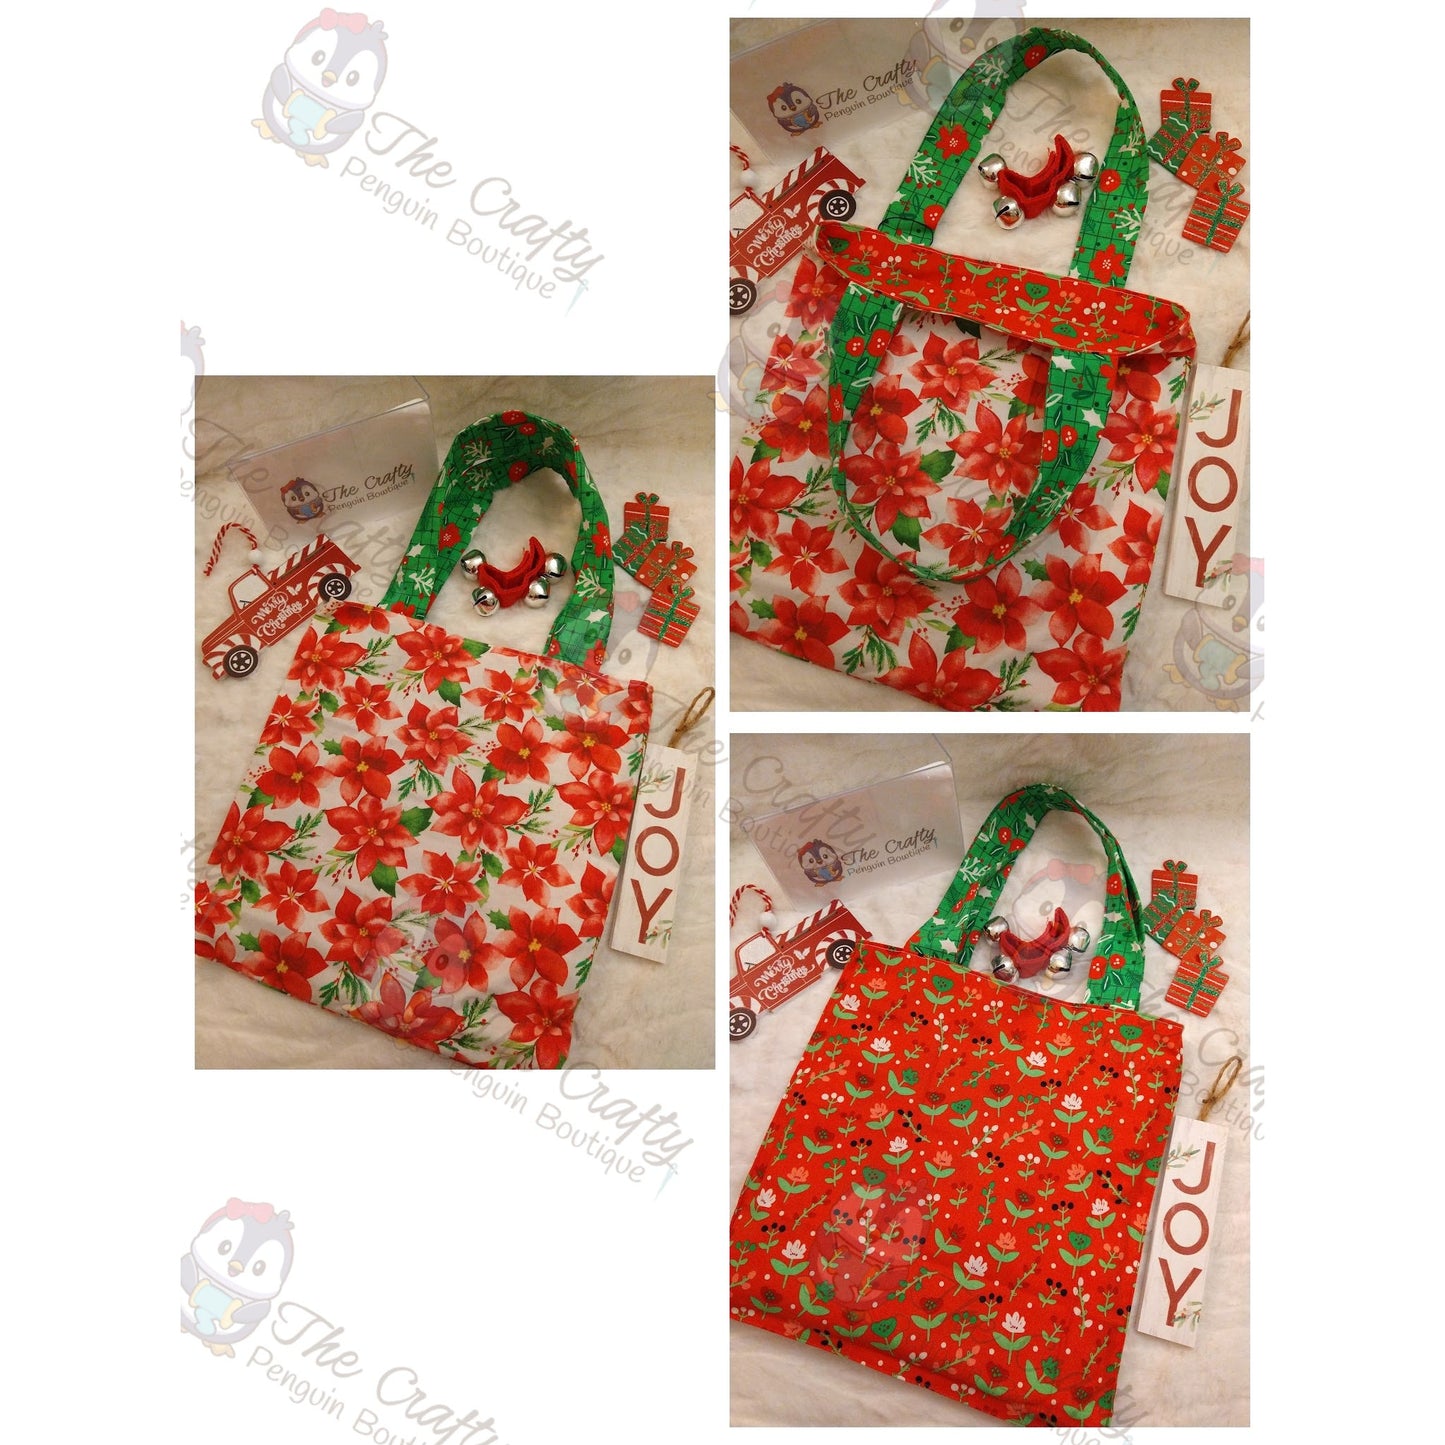 Christmas & Winter Themed Reversible Tote Bags